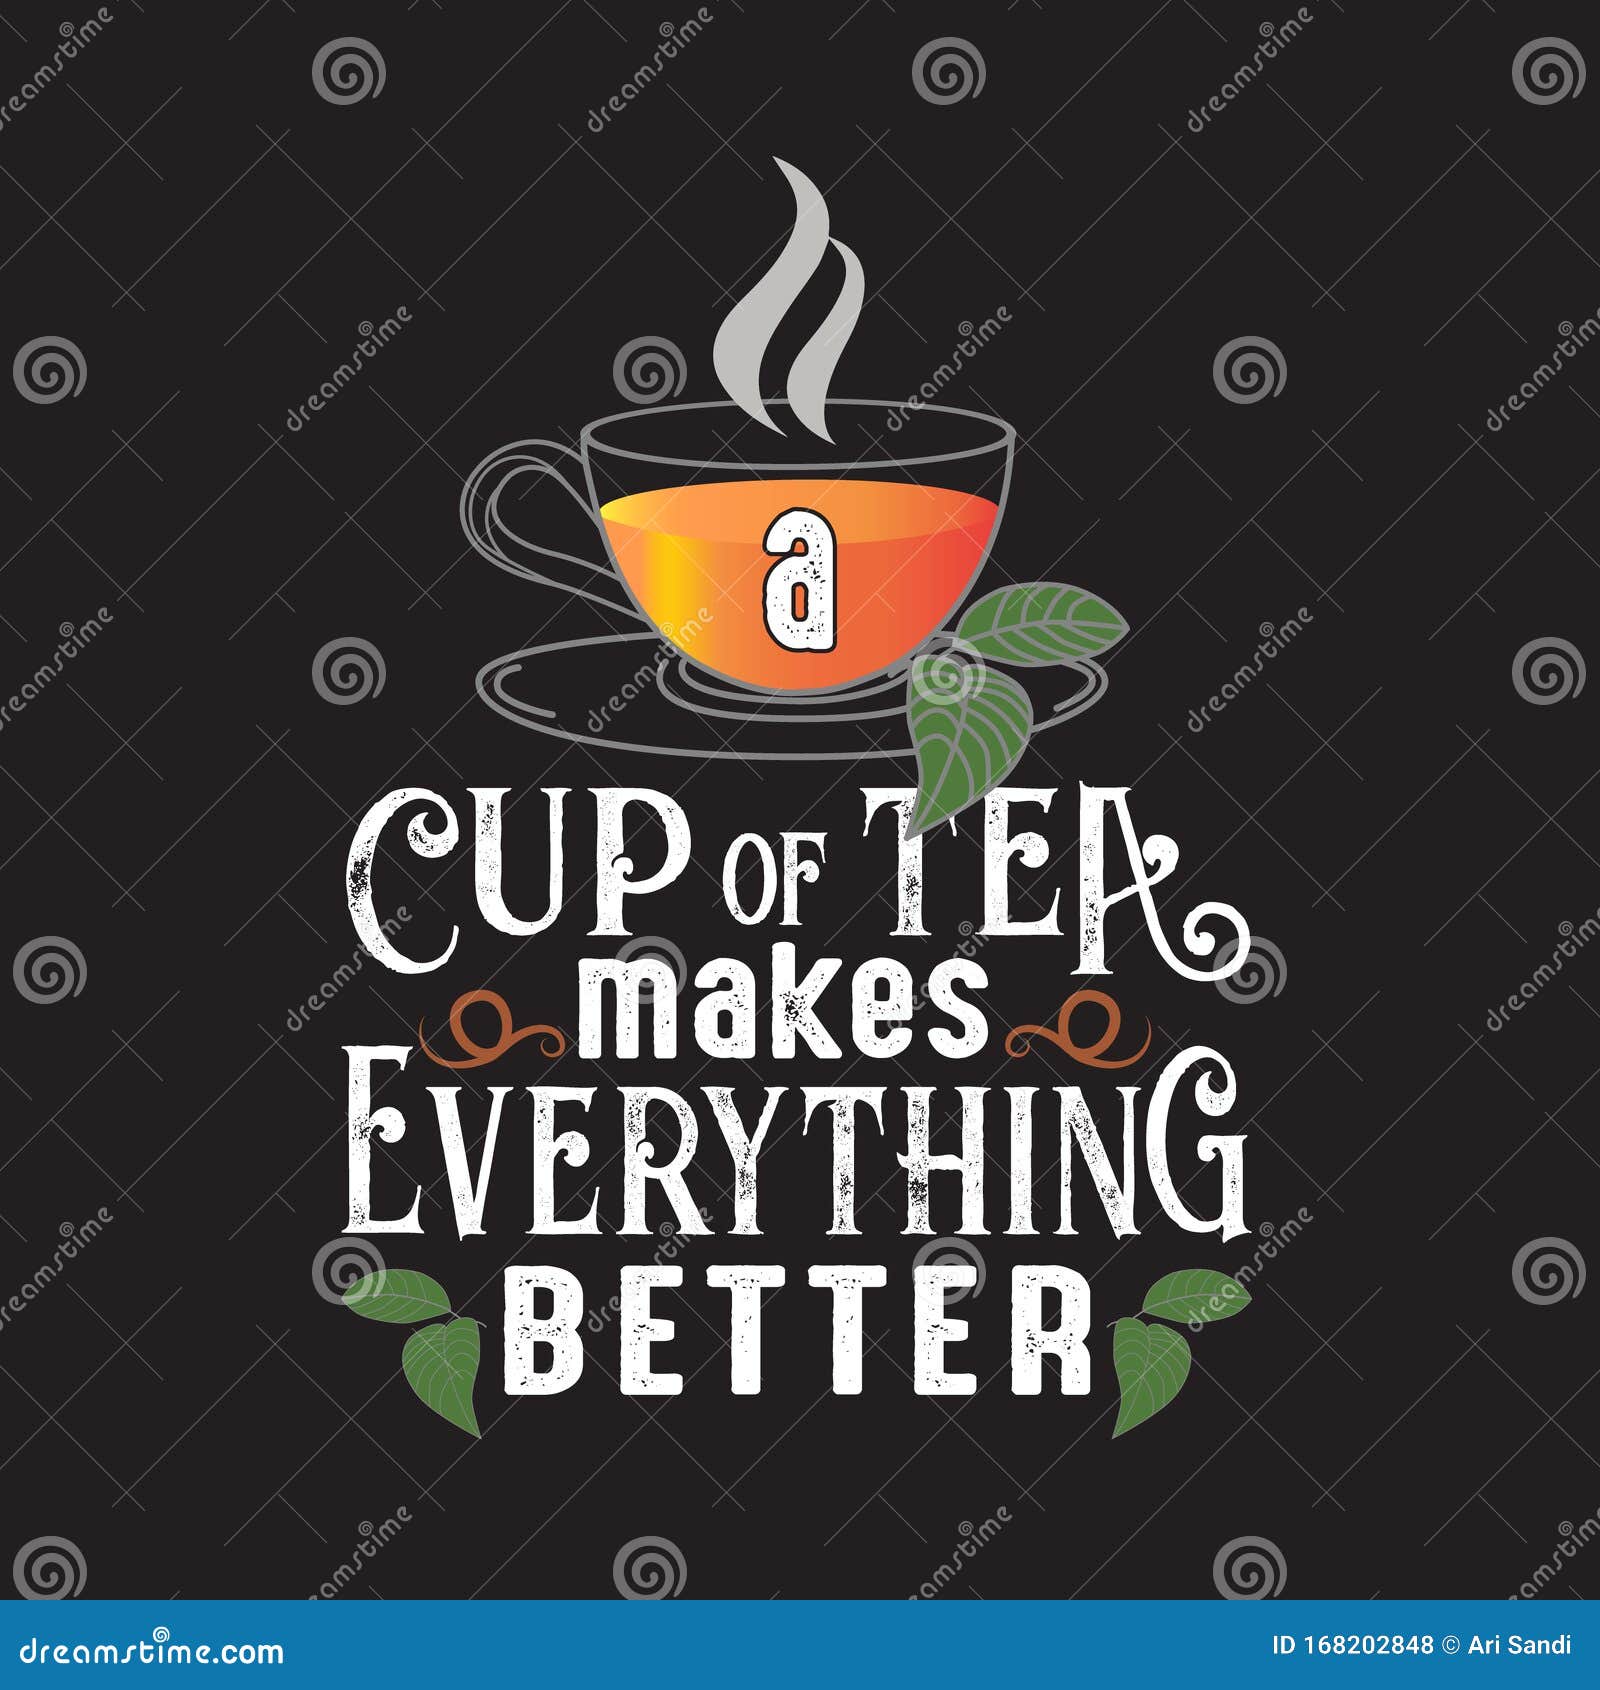 Tea Quotes And Slogan Good For Tee A Cup Of Tea Makes Everything Better Stock Illustration Illustration Of Baby Cartoon